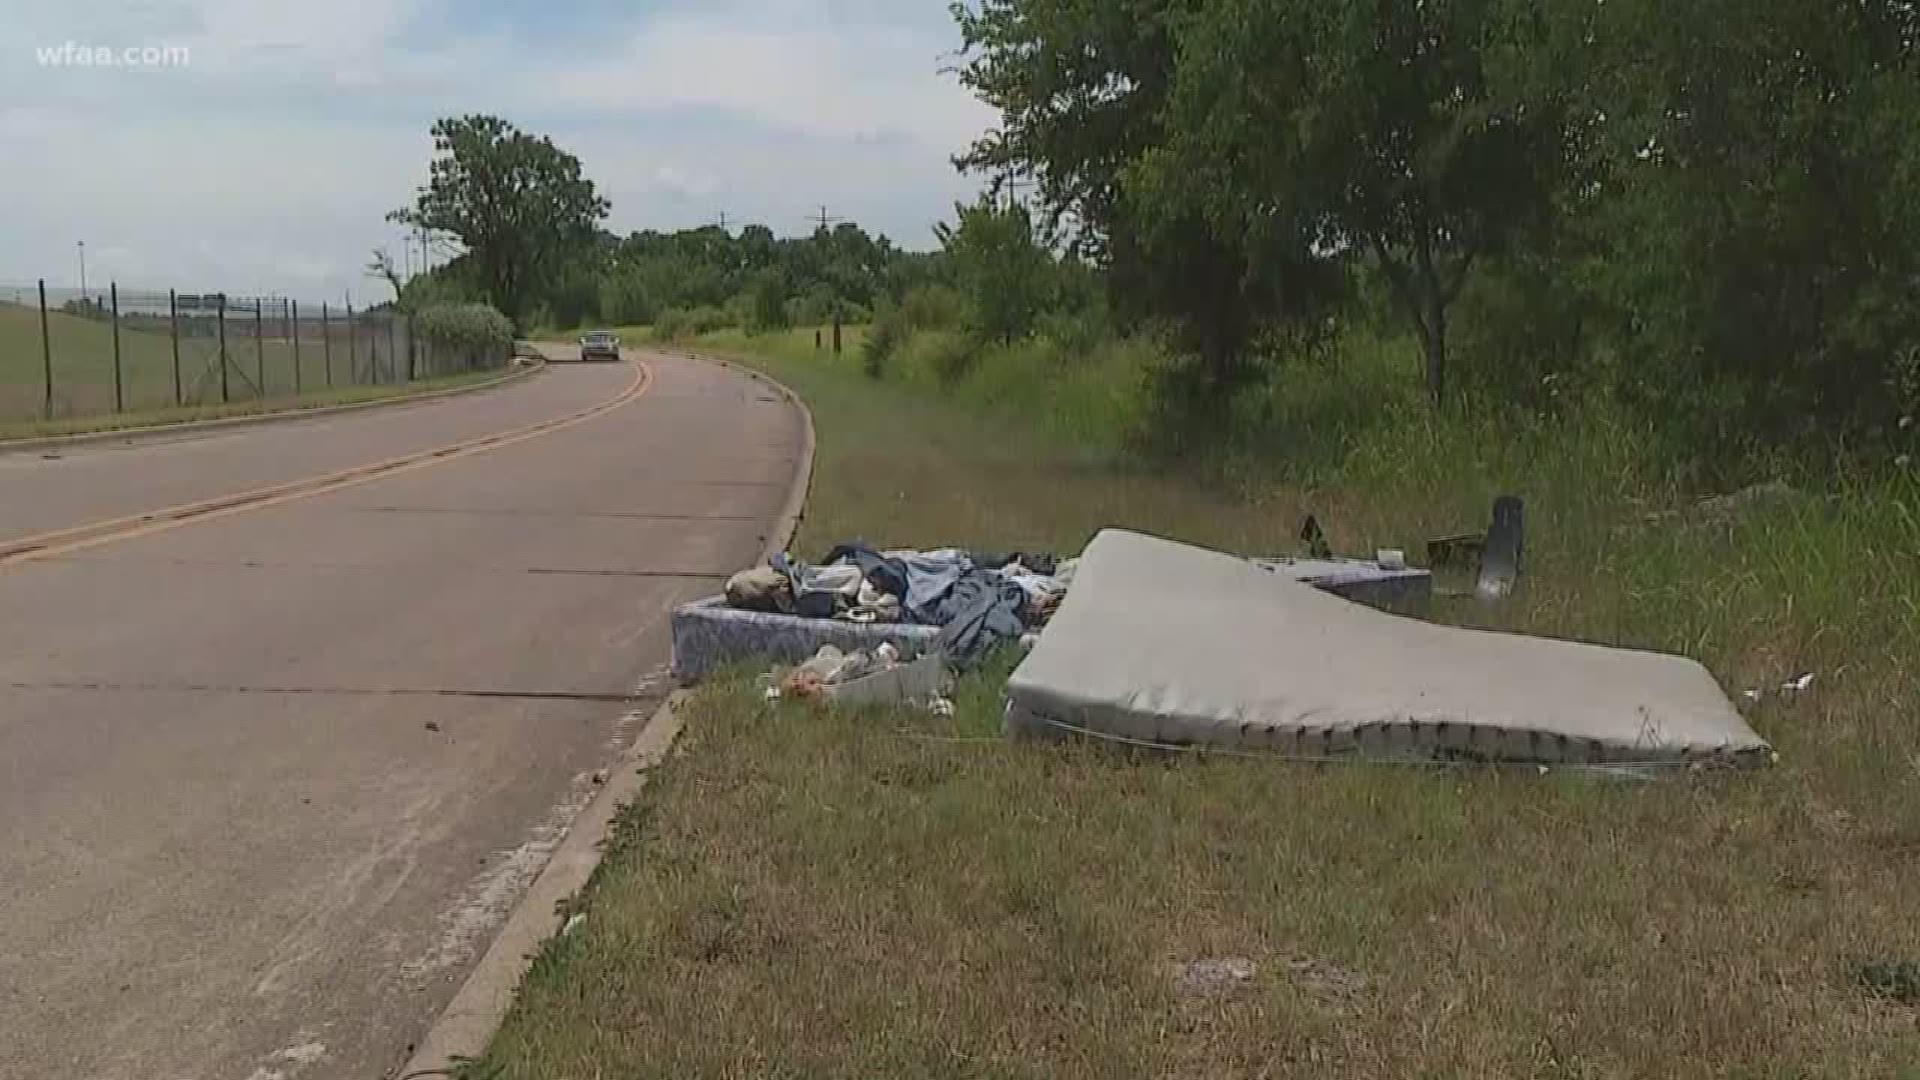 Neighbors have complained about illegal dumping and homeless camps, among other violations.